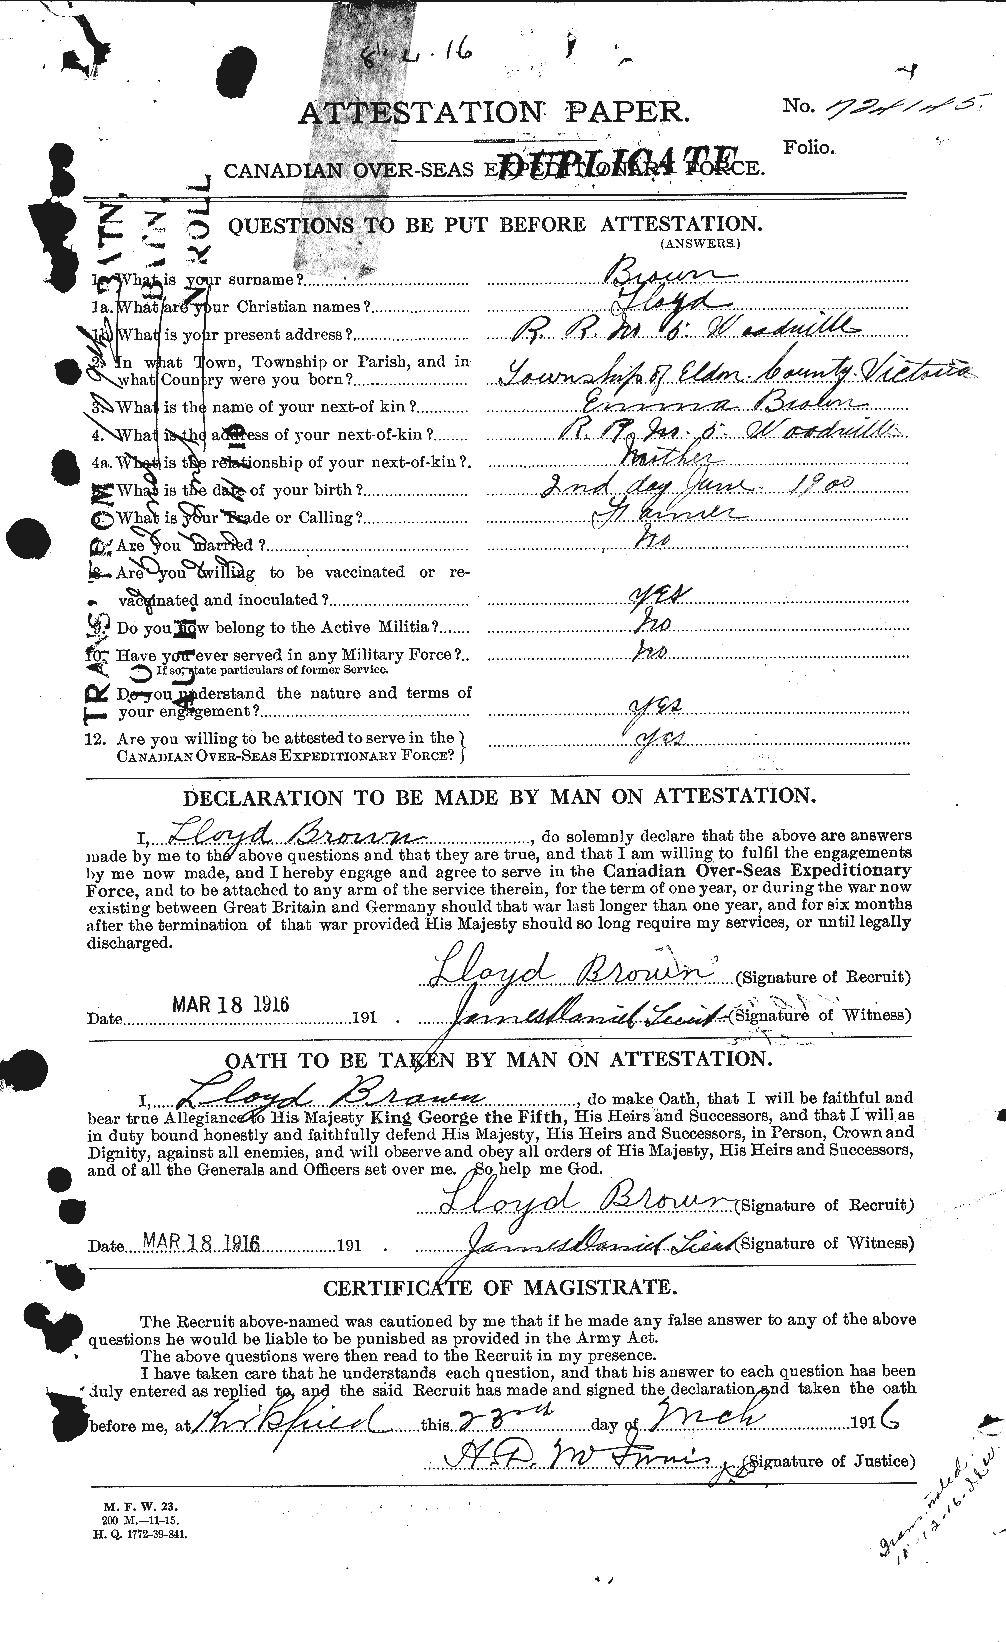 Personnel Records of the First World War - CEF 266325a